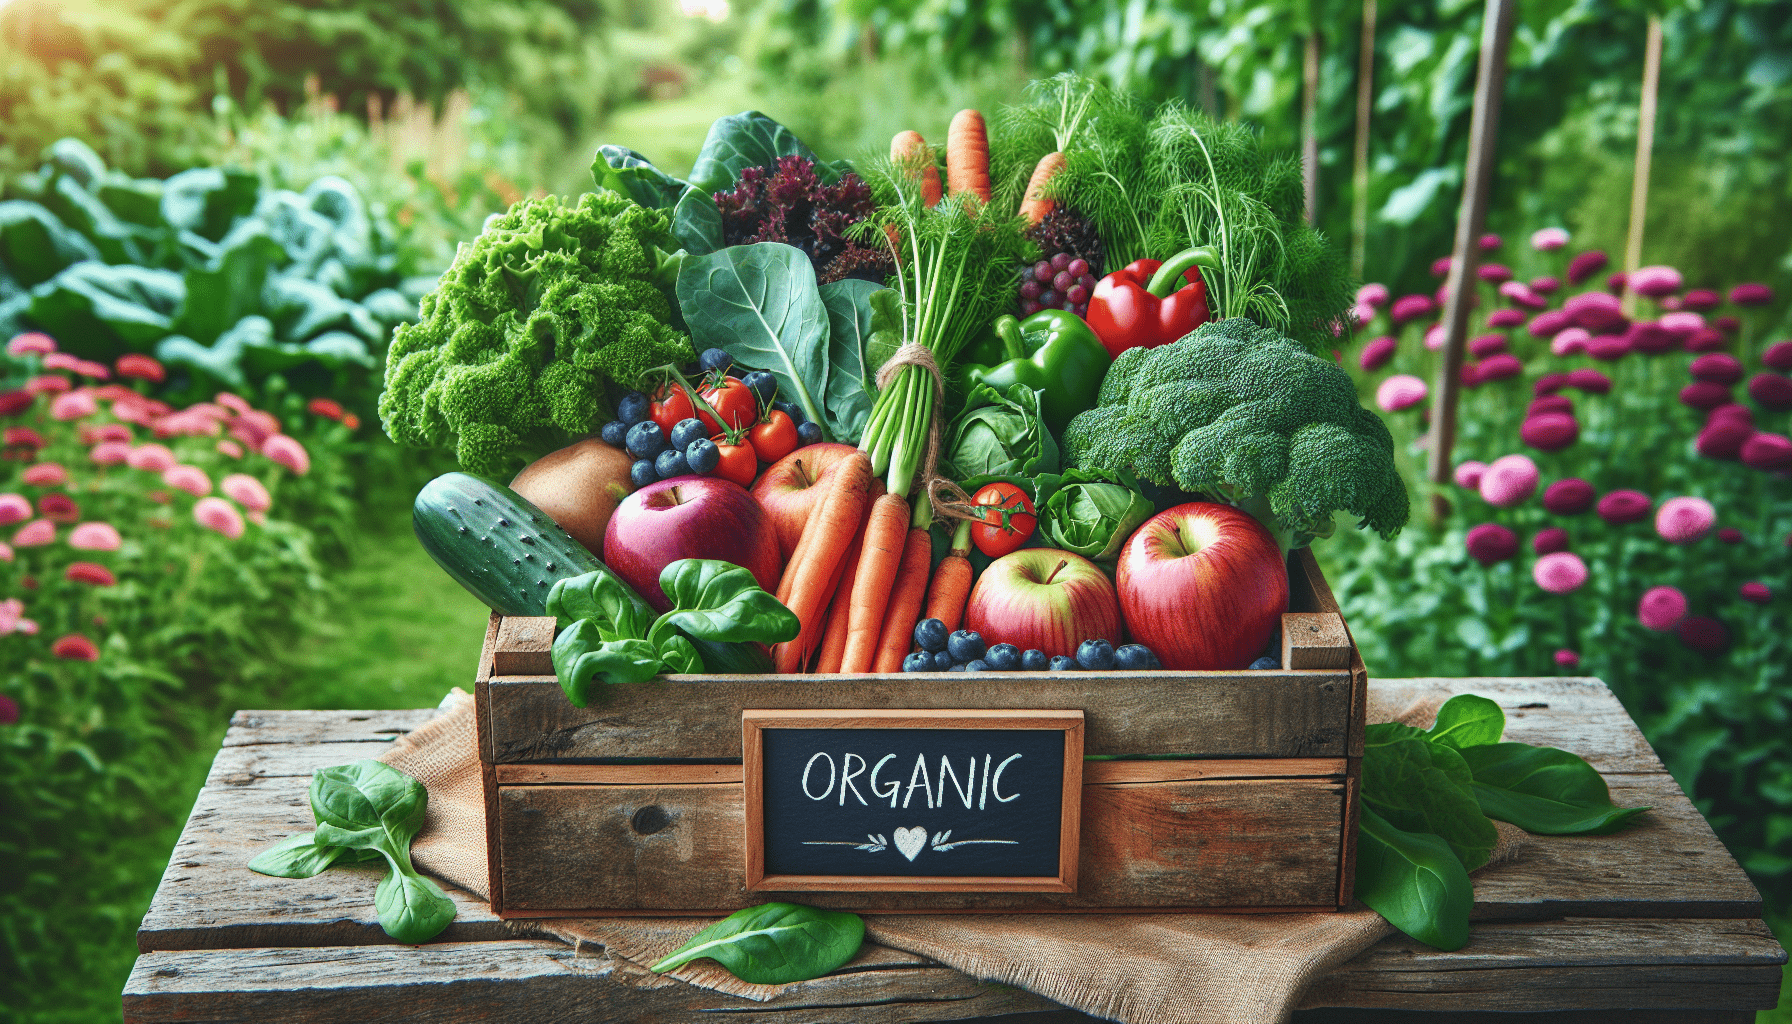 Can Organic Food Improve Overall Health and Wellness